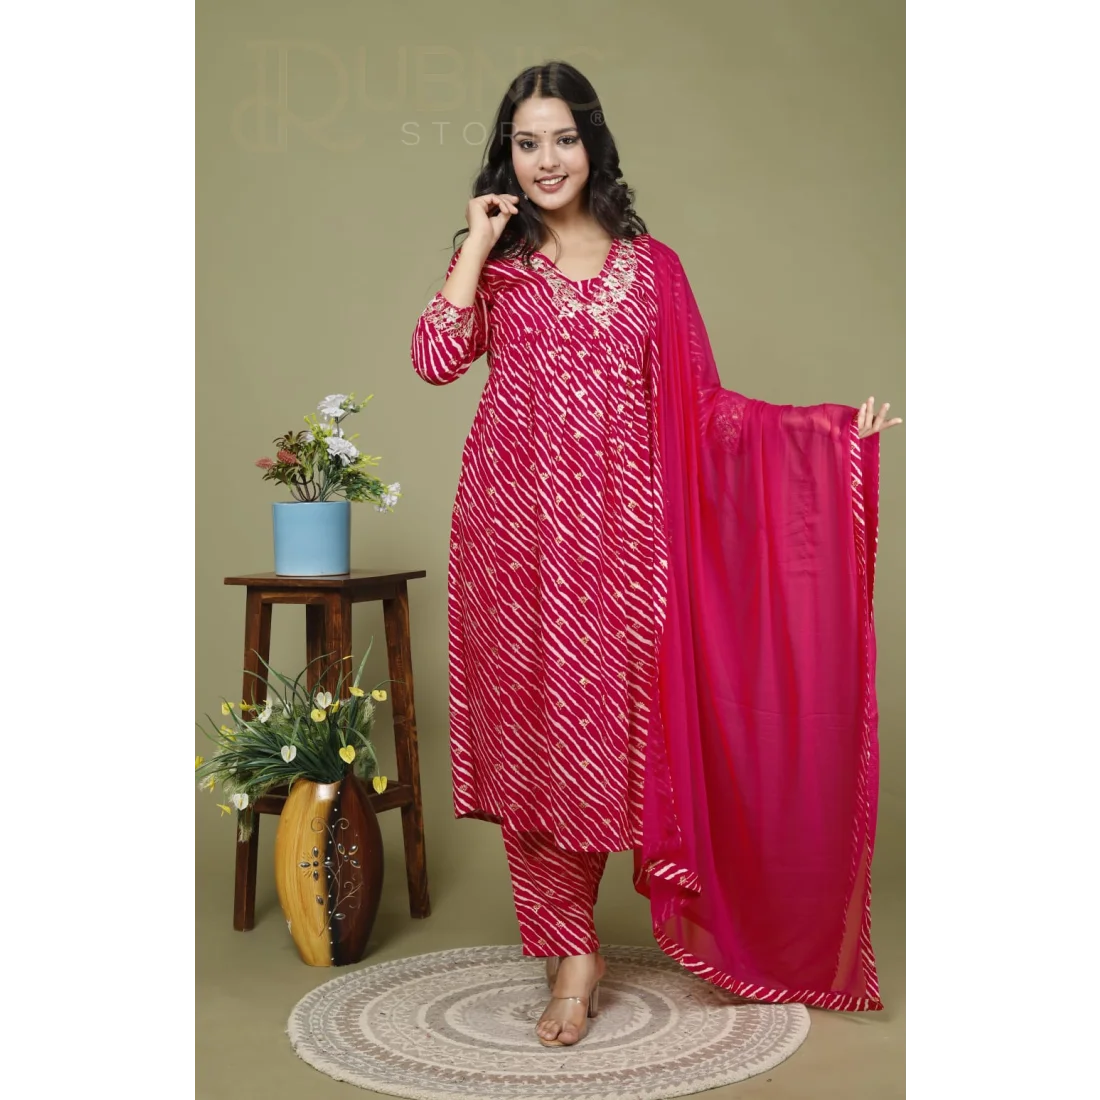 Rayon Kurti Pant Set with net Dupatta at Rs.799/Piece in dehradun offer by  M S Shine Shopiee